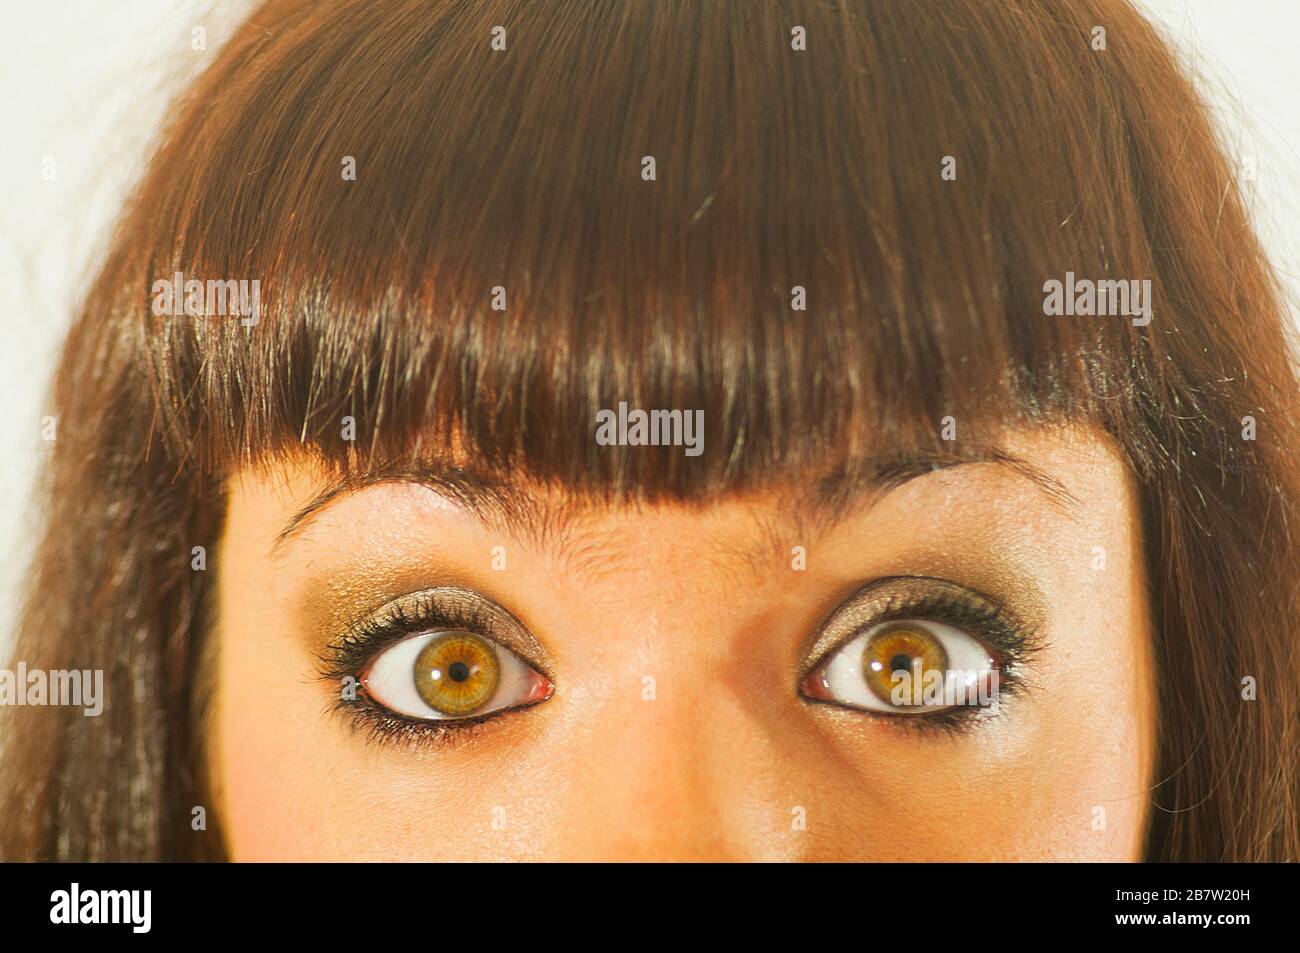 Young woman's eyes expressing surprise. Close view. Stock Photo